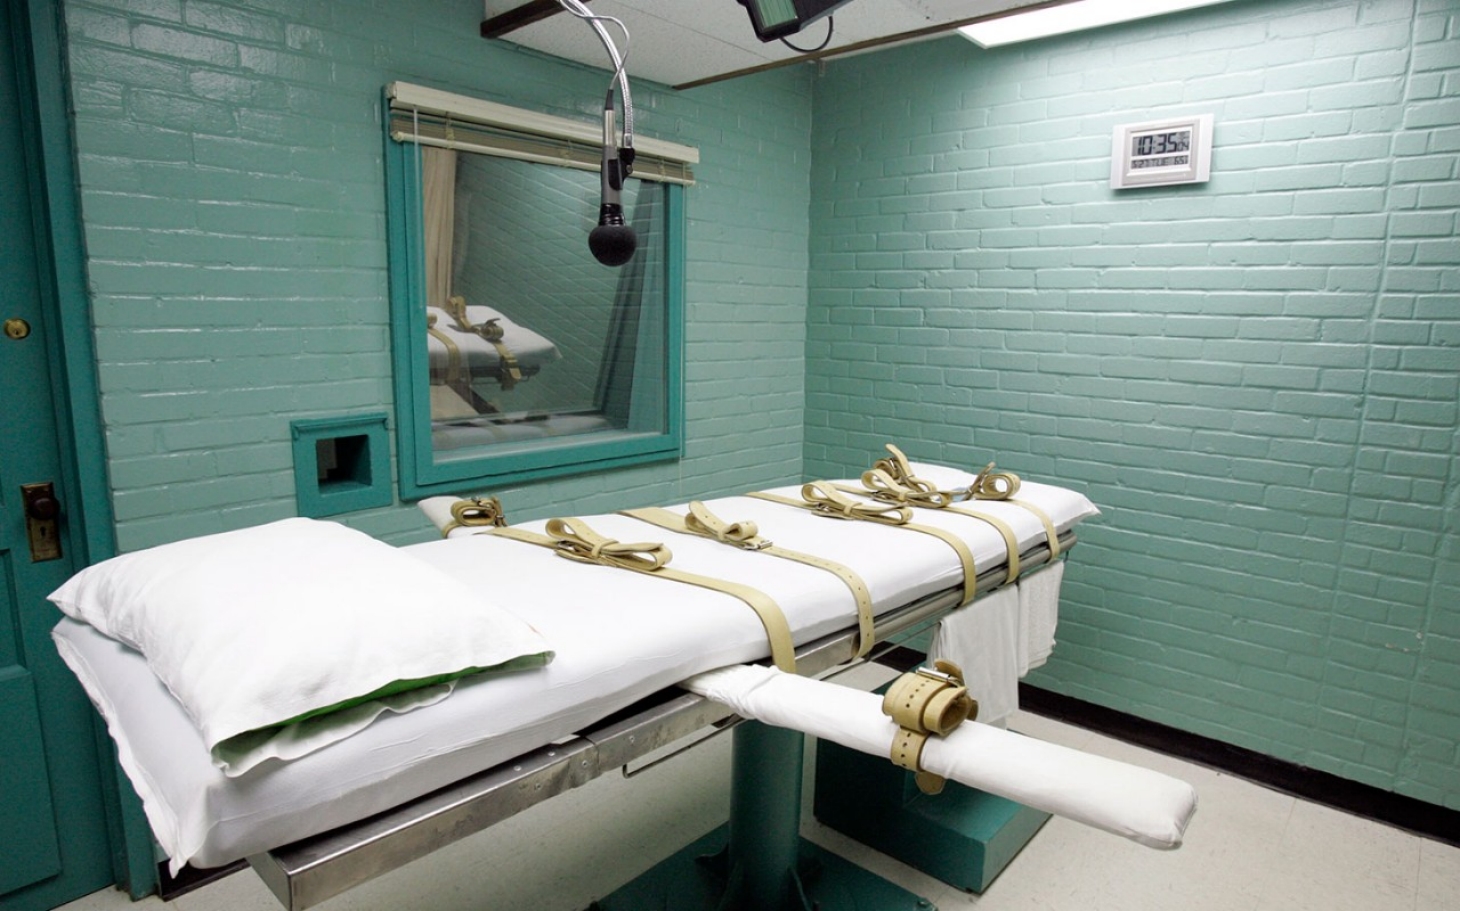 Ohio to resume executions in January with new ‘three-drug method’